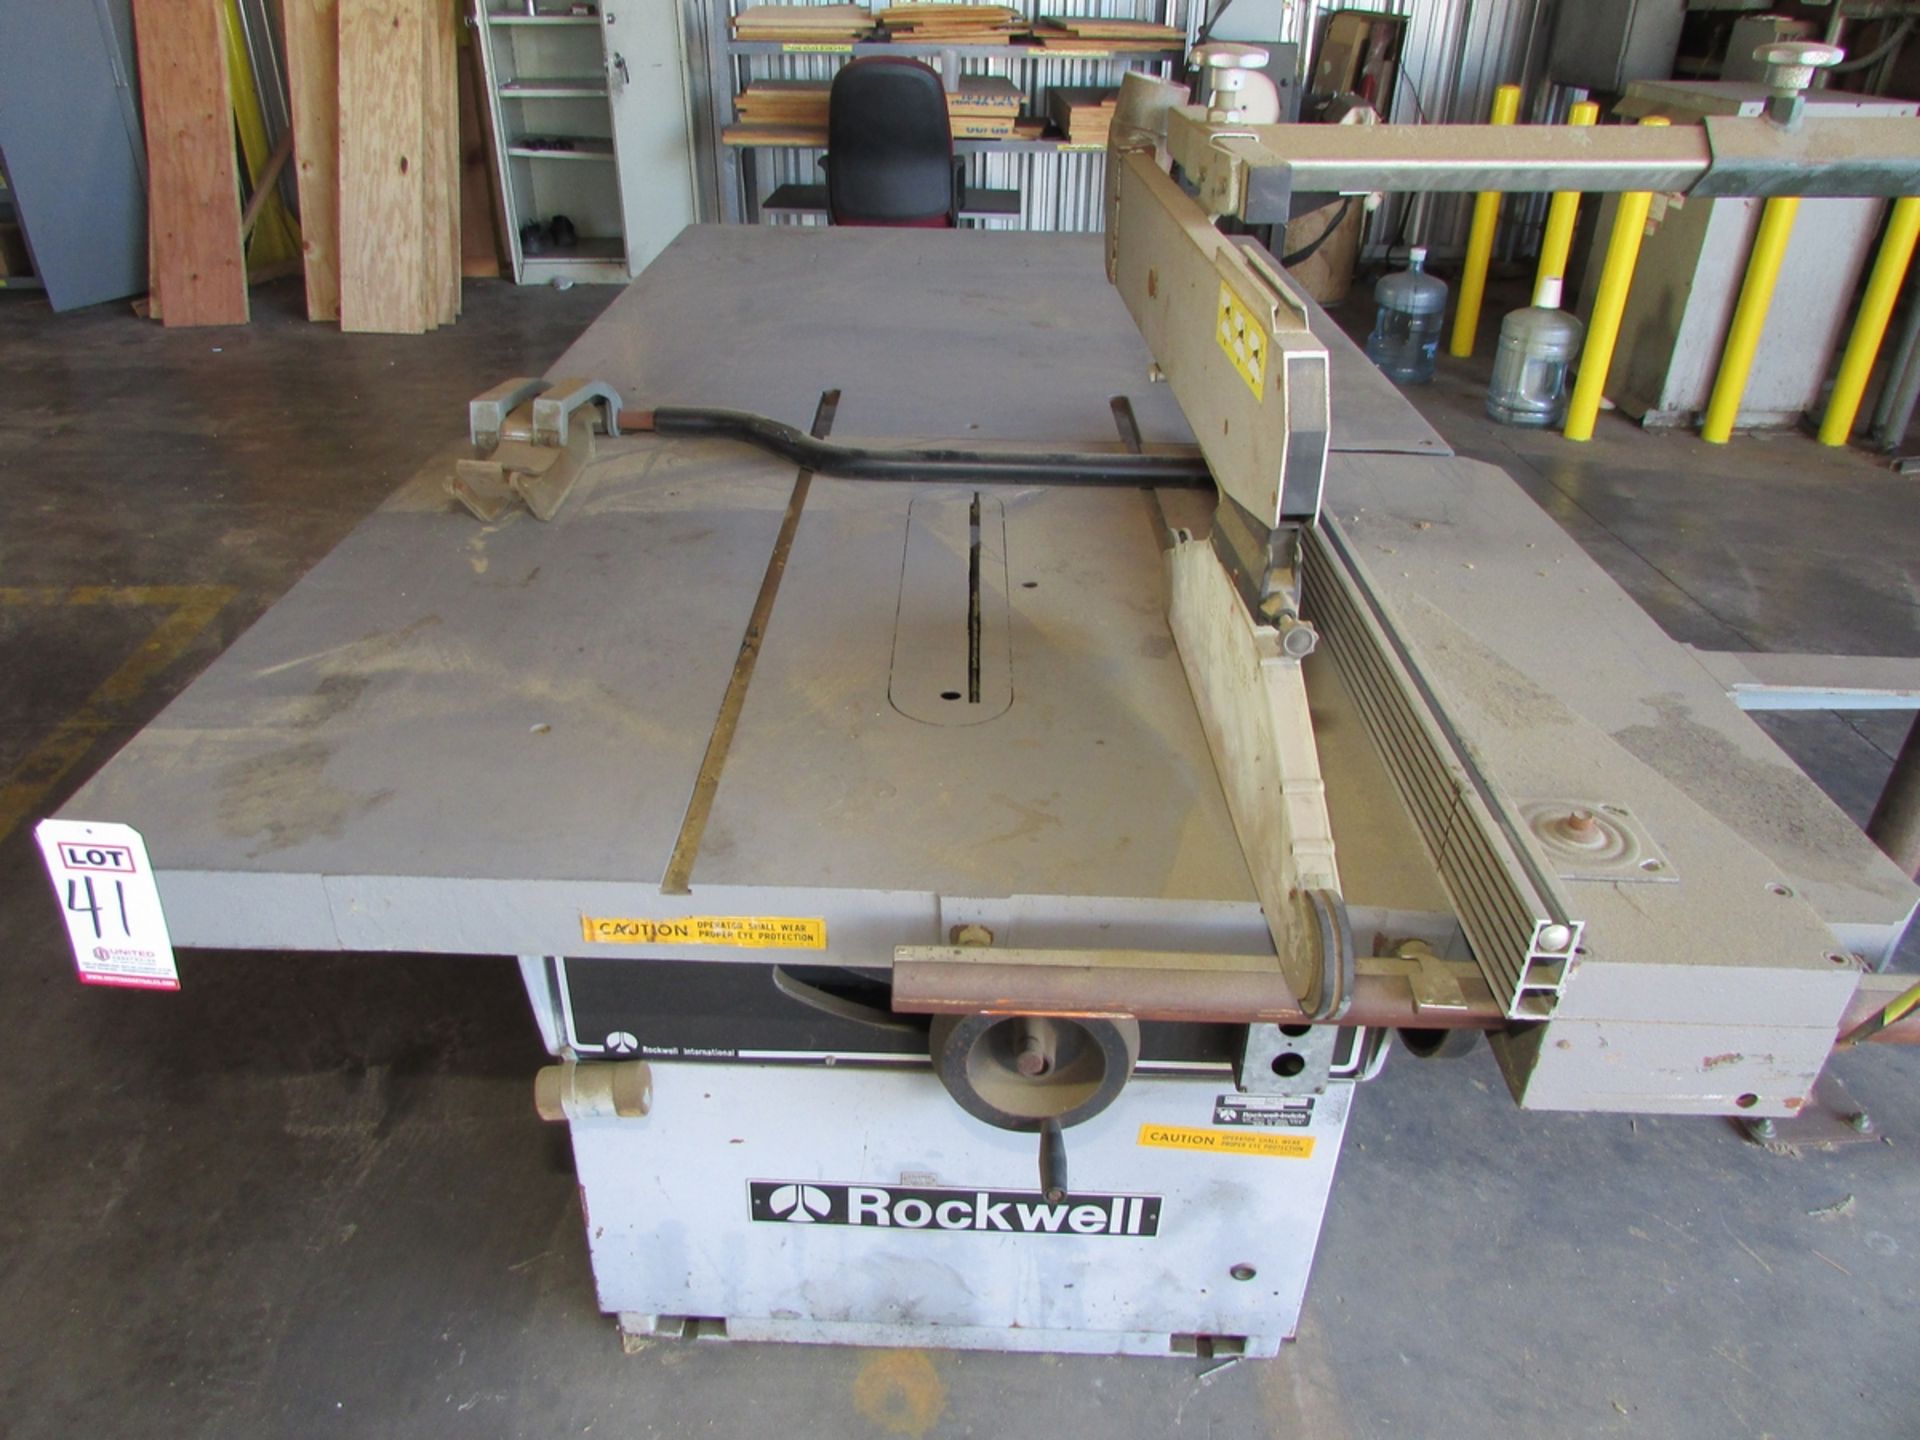 ROCKWELL INVICTA 12" TILTING ARBOR TABLE SAW, MODEL RT-40, S/N 1012, ALTENDORF WA107 GUARD, 60" X - Image 5 of 10